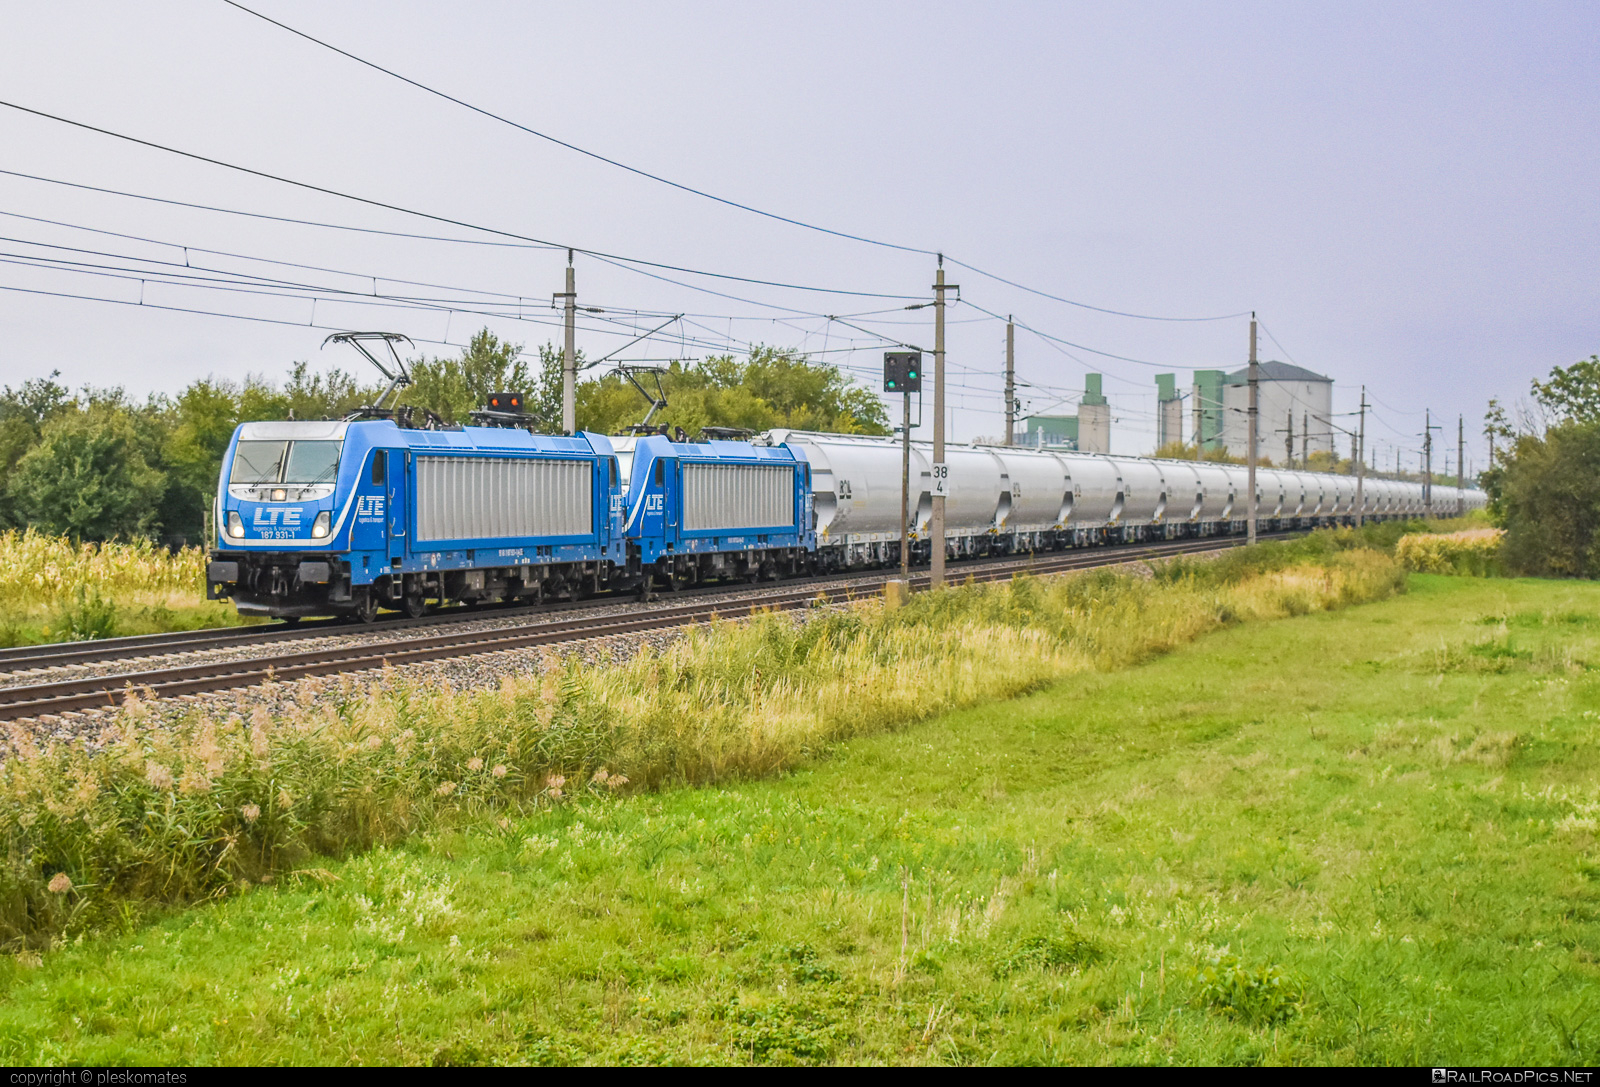 Bombardier TRAXX F160 AC3 - 187 931-1 operated by LTE Logistik und Transport GmbH #bombardier #bombardiertraxx #hopperwagon #lte #ltelogistikundtransport #ltelogistikundtransportgmbh #traxx #traxxf160 #traxxf160ac #traxxf160ac3